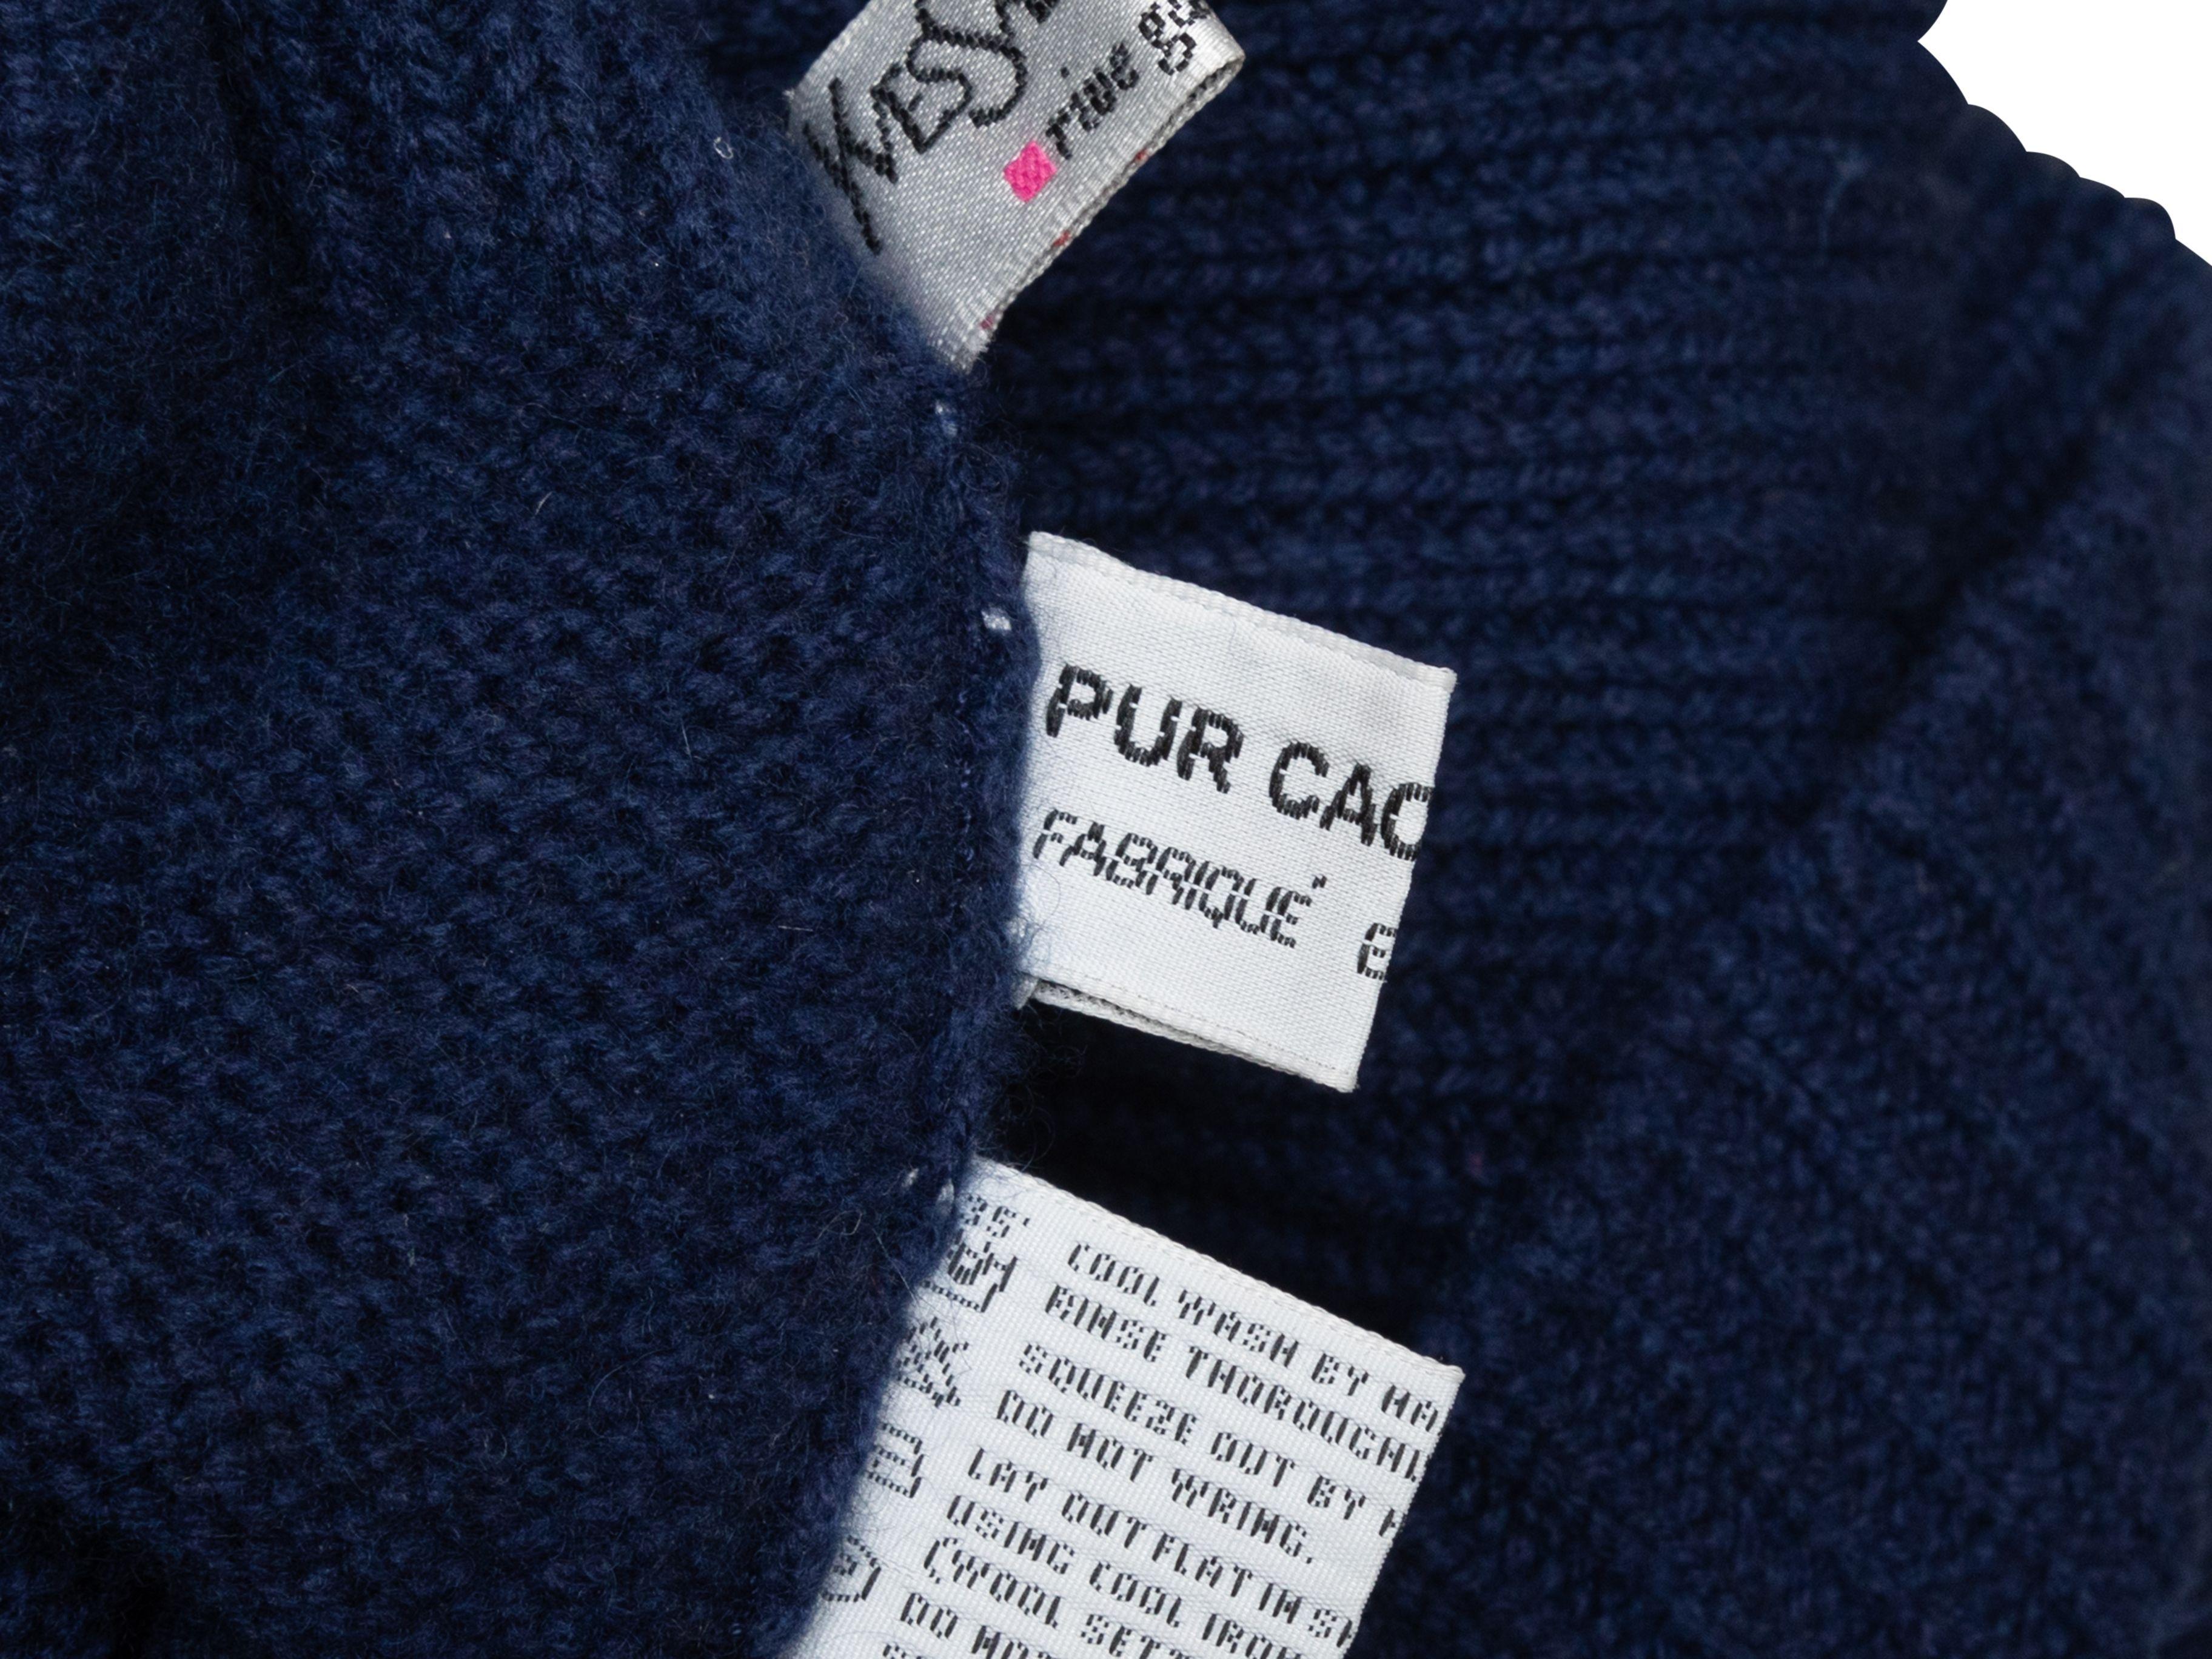 Product Details: Navy cashmere turtleneck sweater by Yves Saint Laurent. Long sleeves. 28